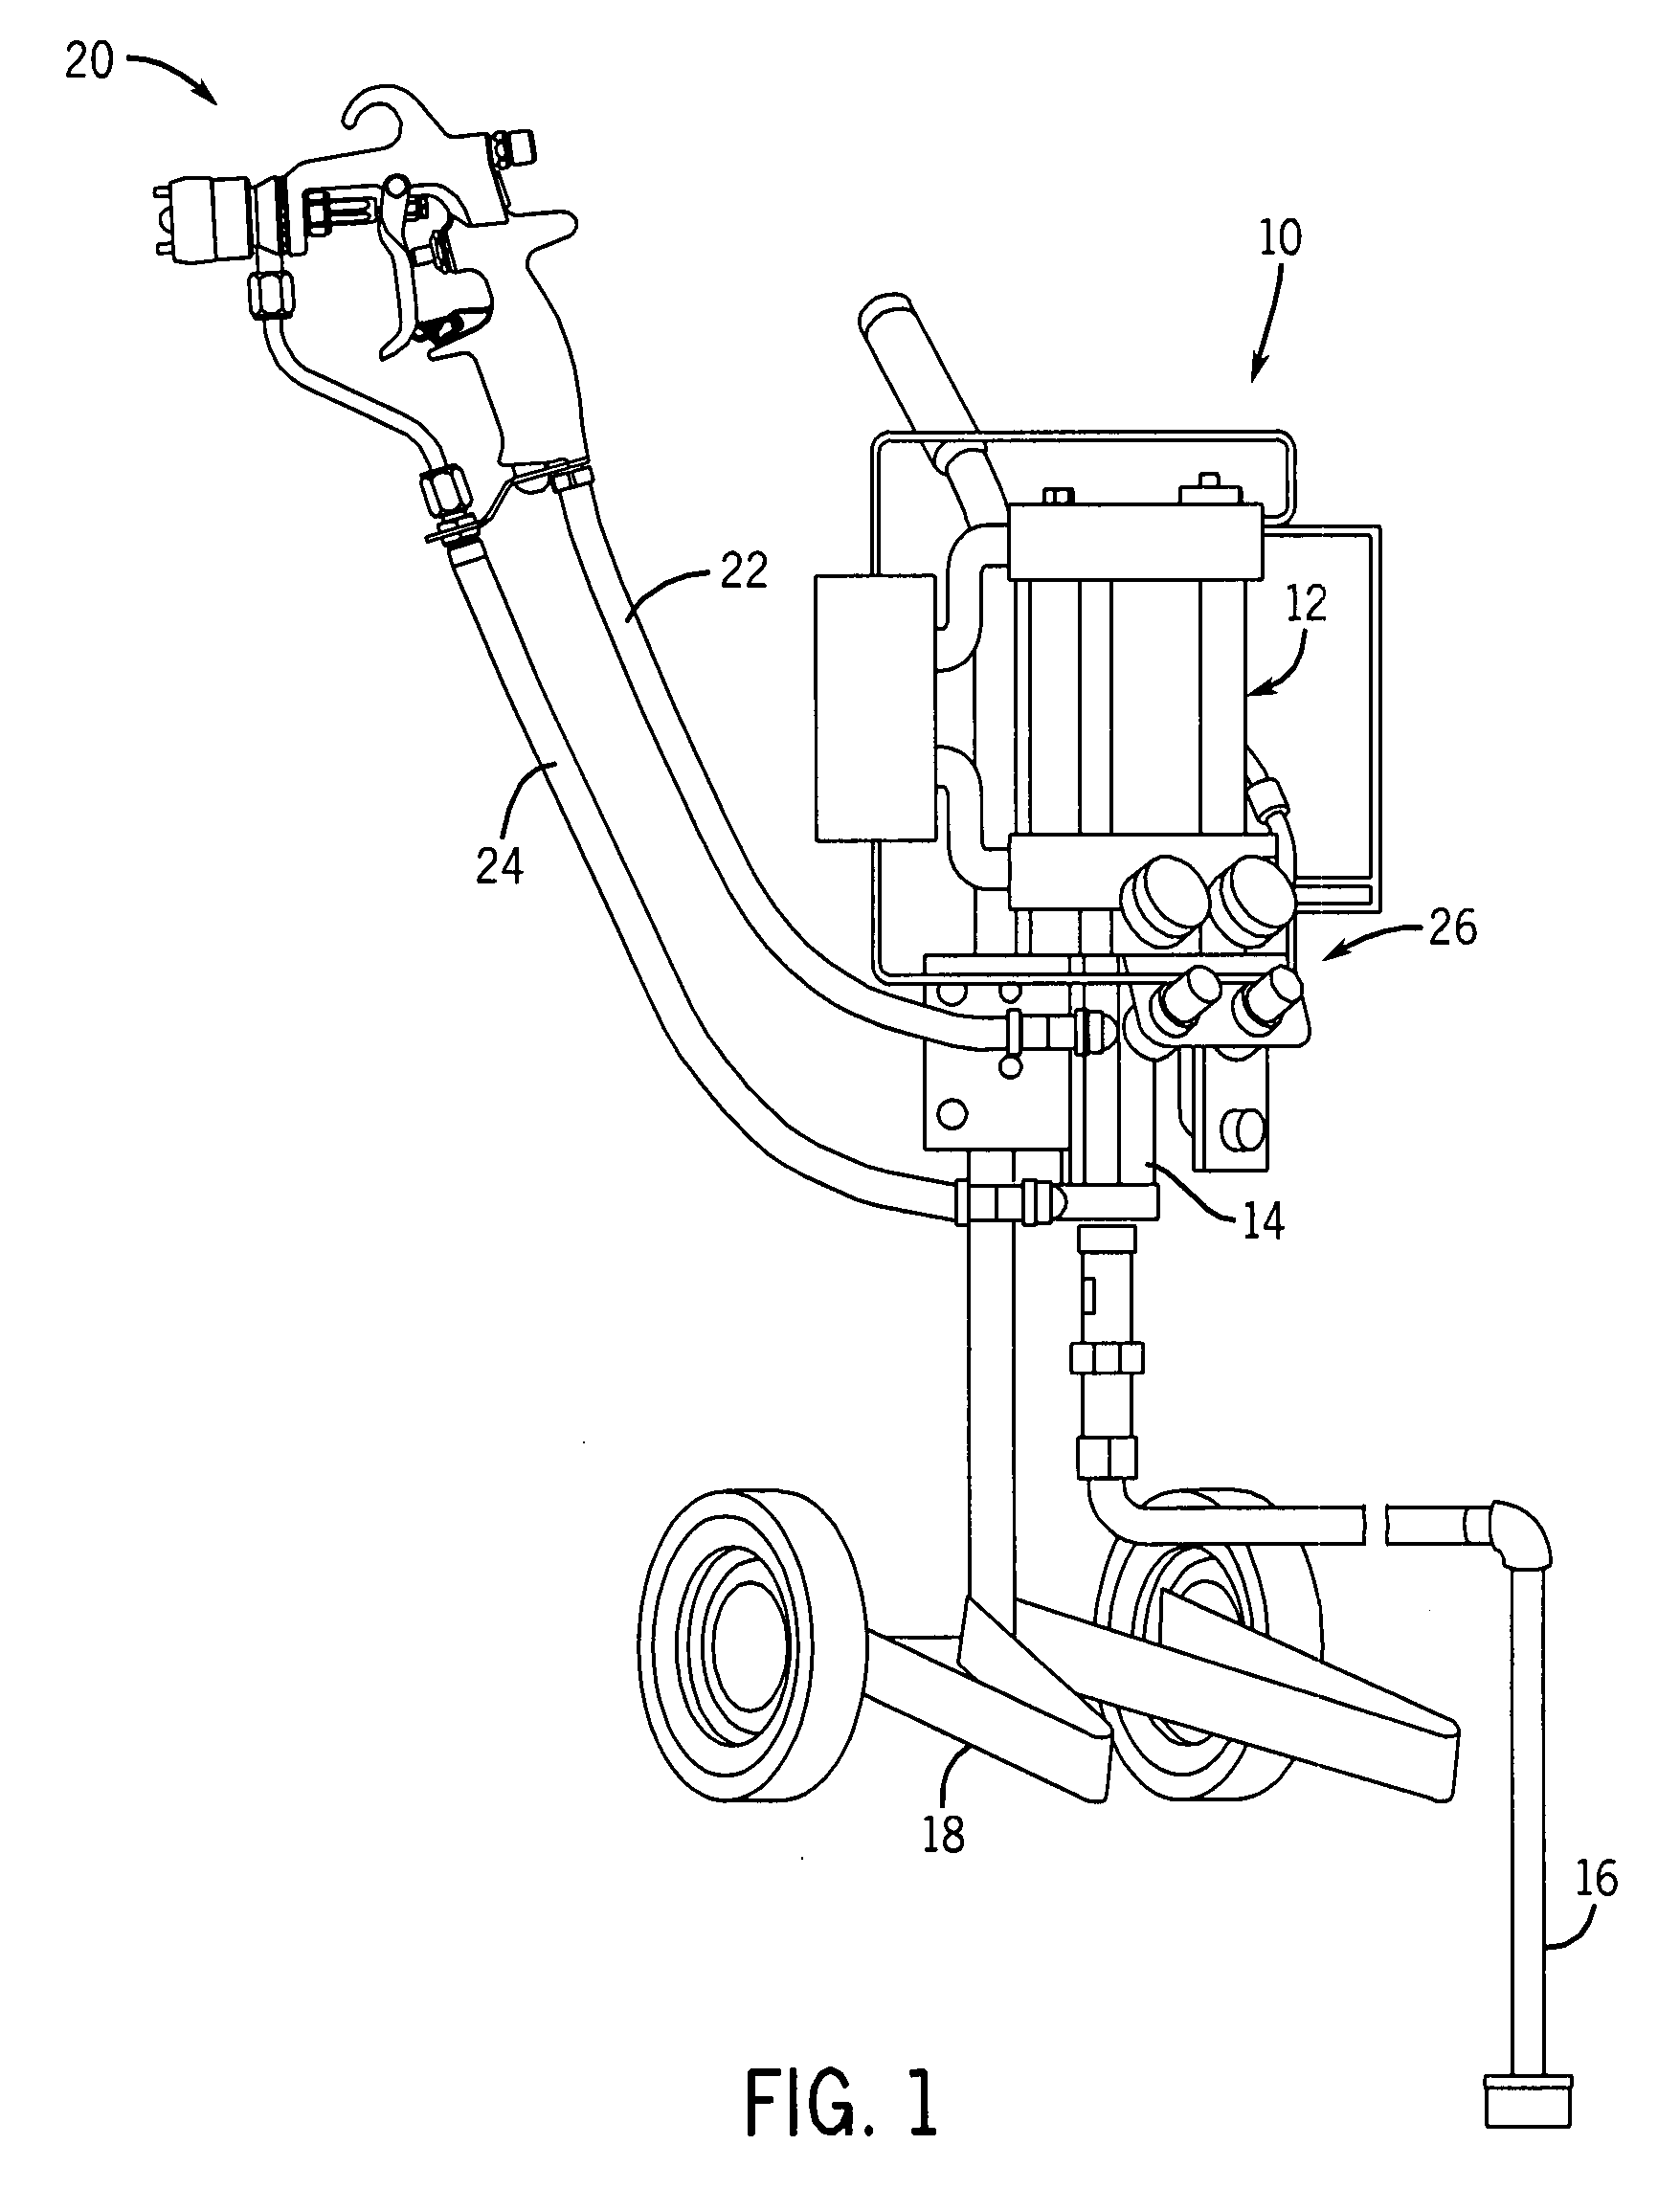 Magnetically sequenced pneumatic motor